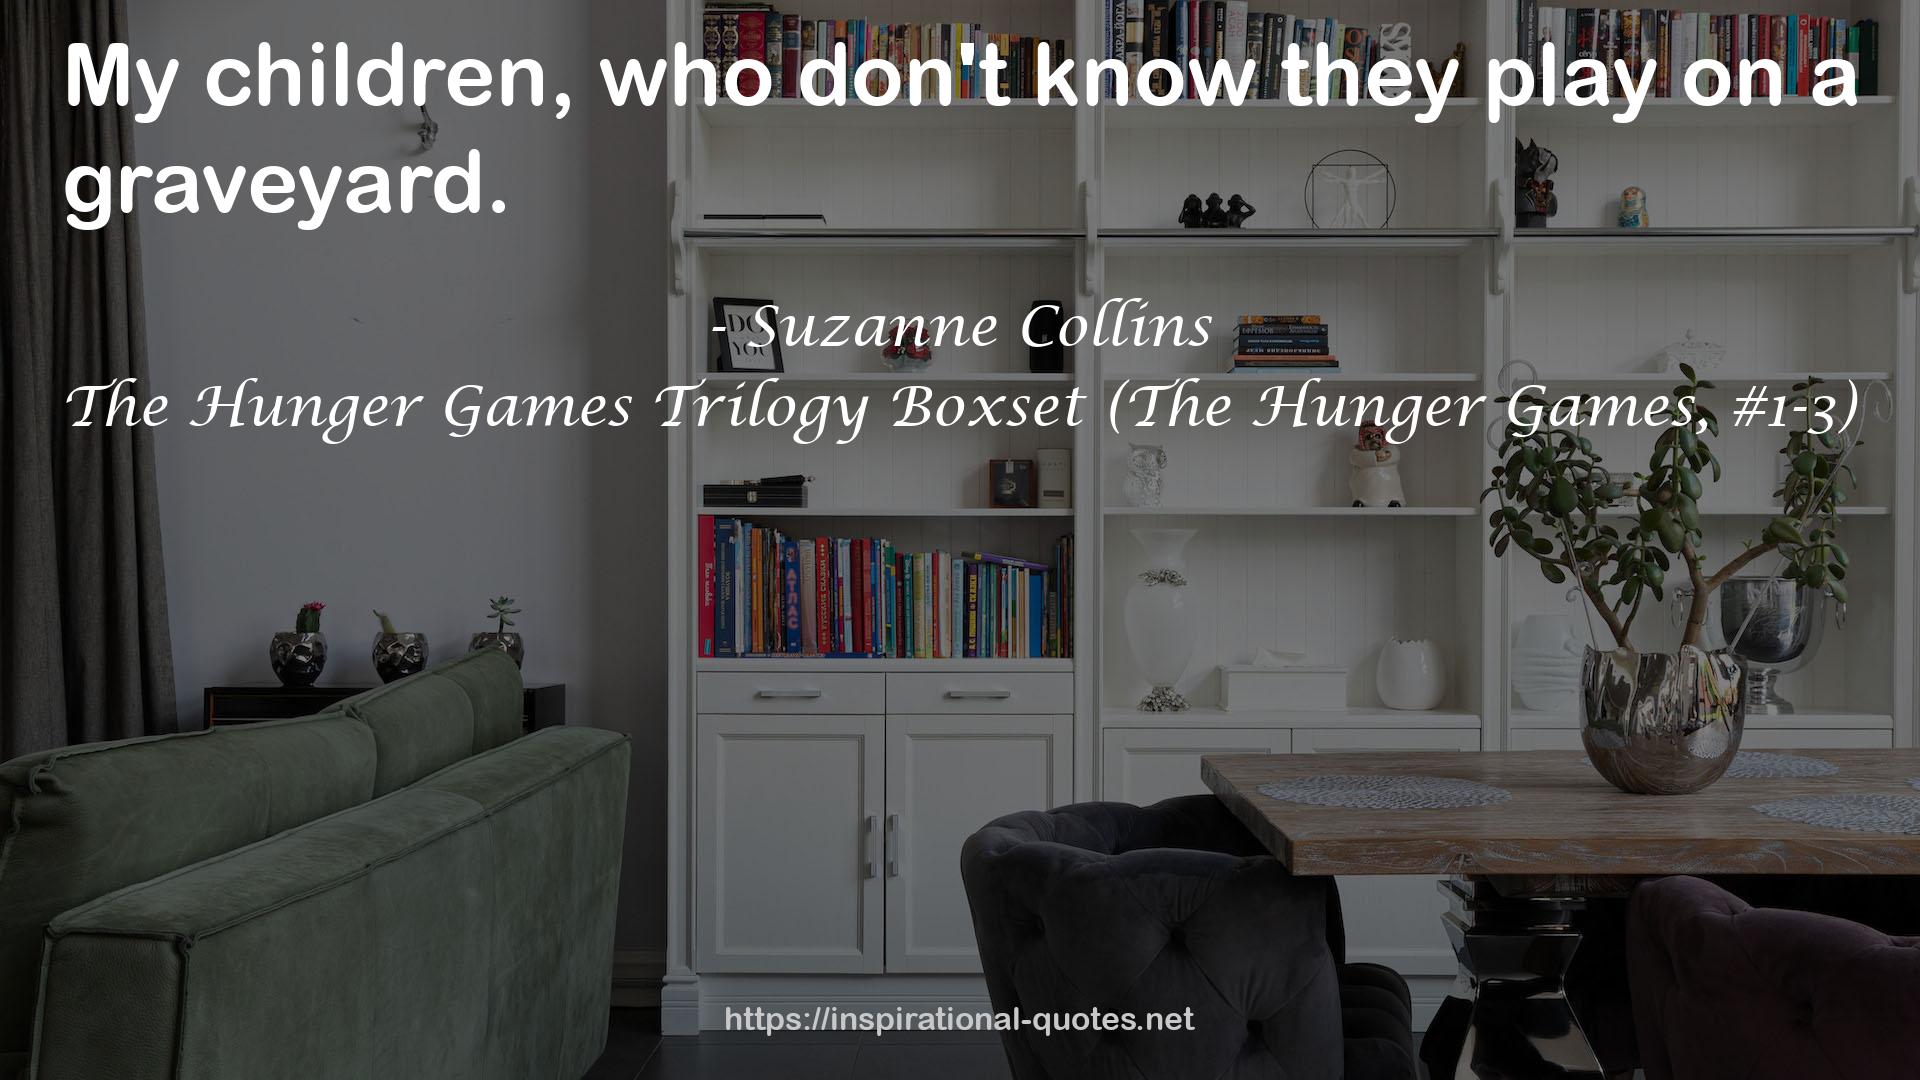 The Hunger Games Trilogy Boxset (The Hunger Games, #1-3) QUOTES